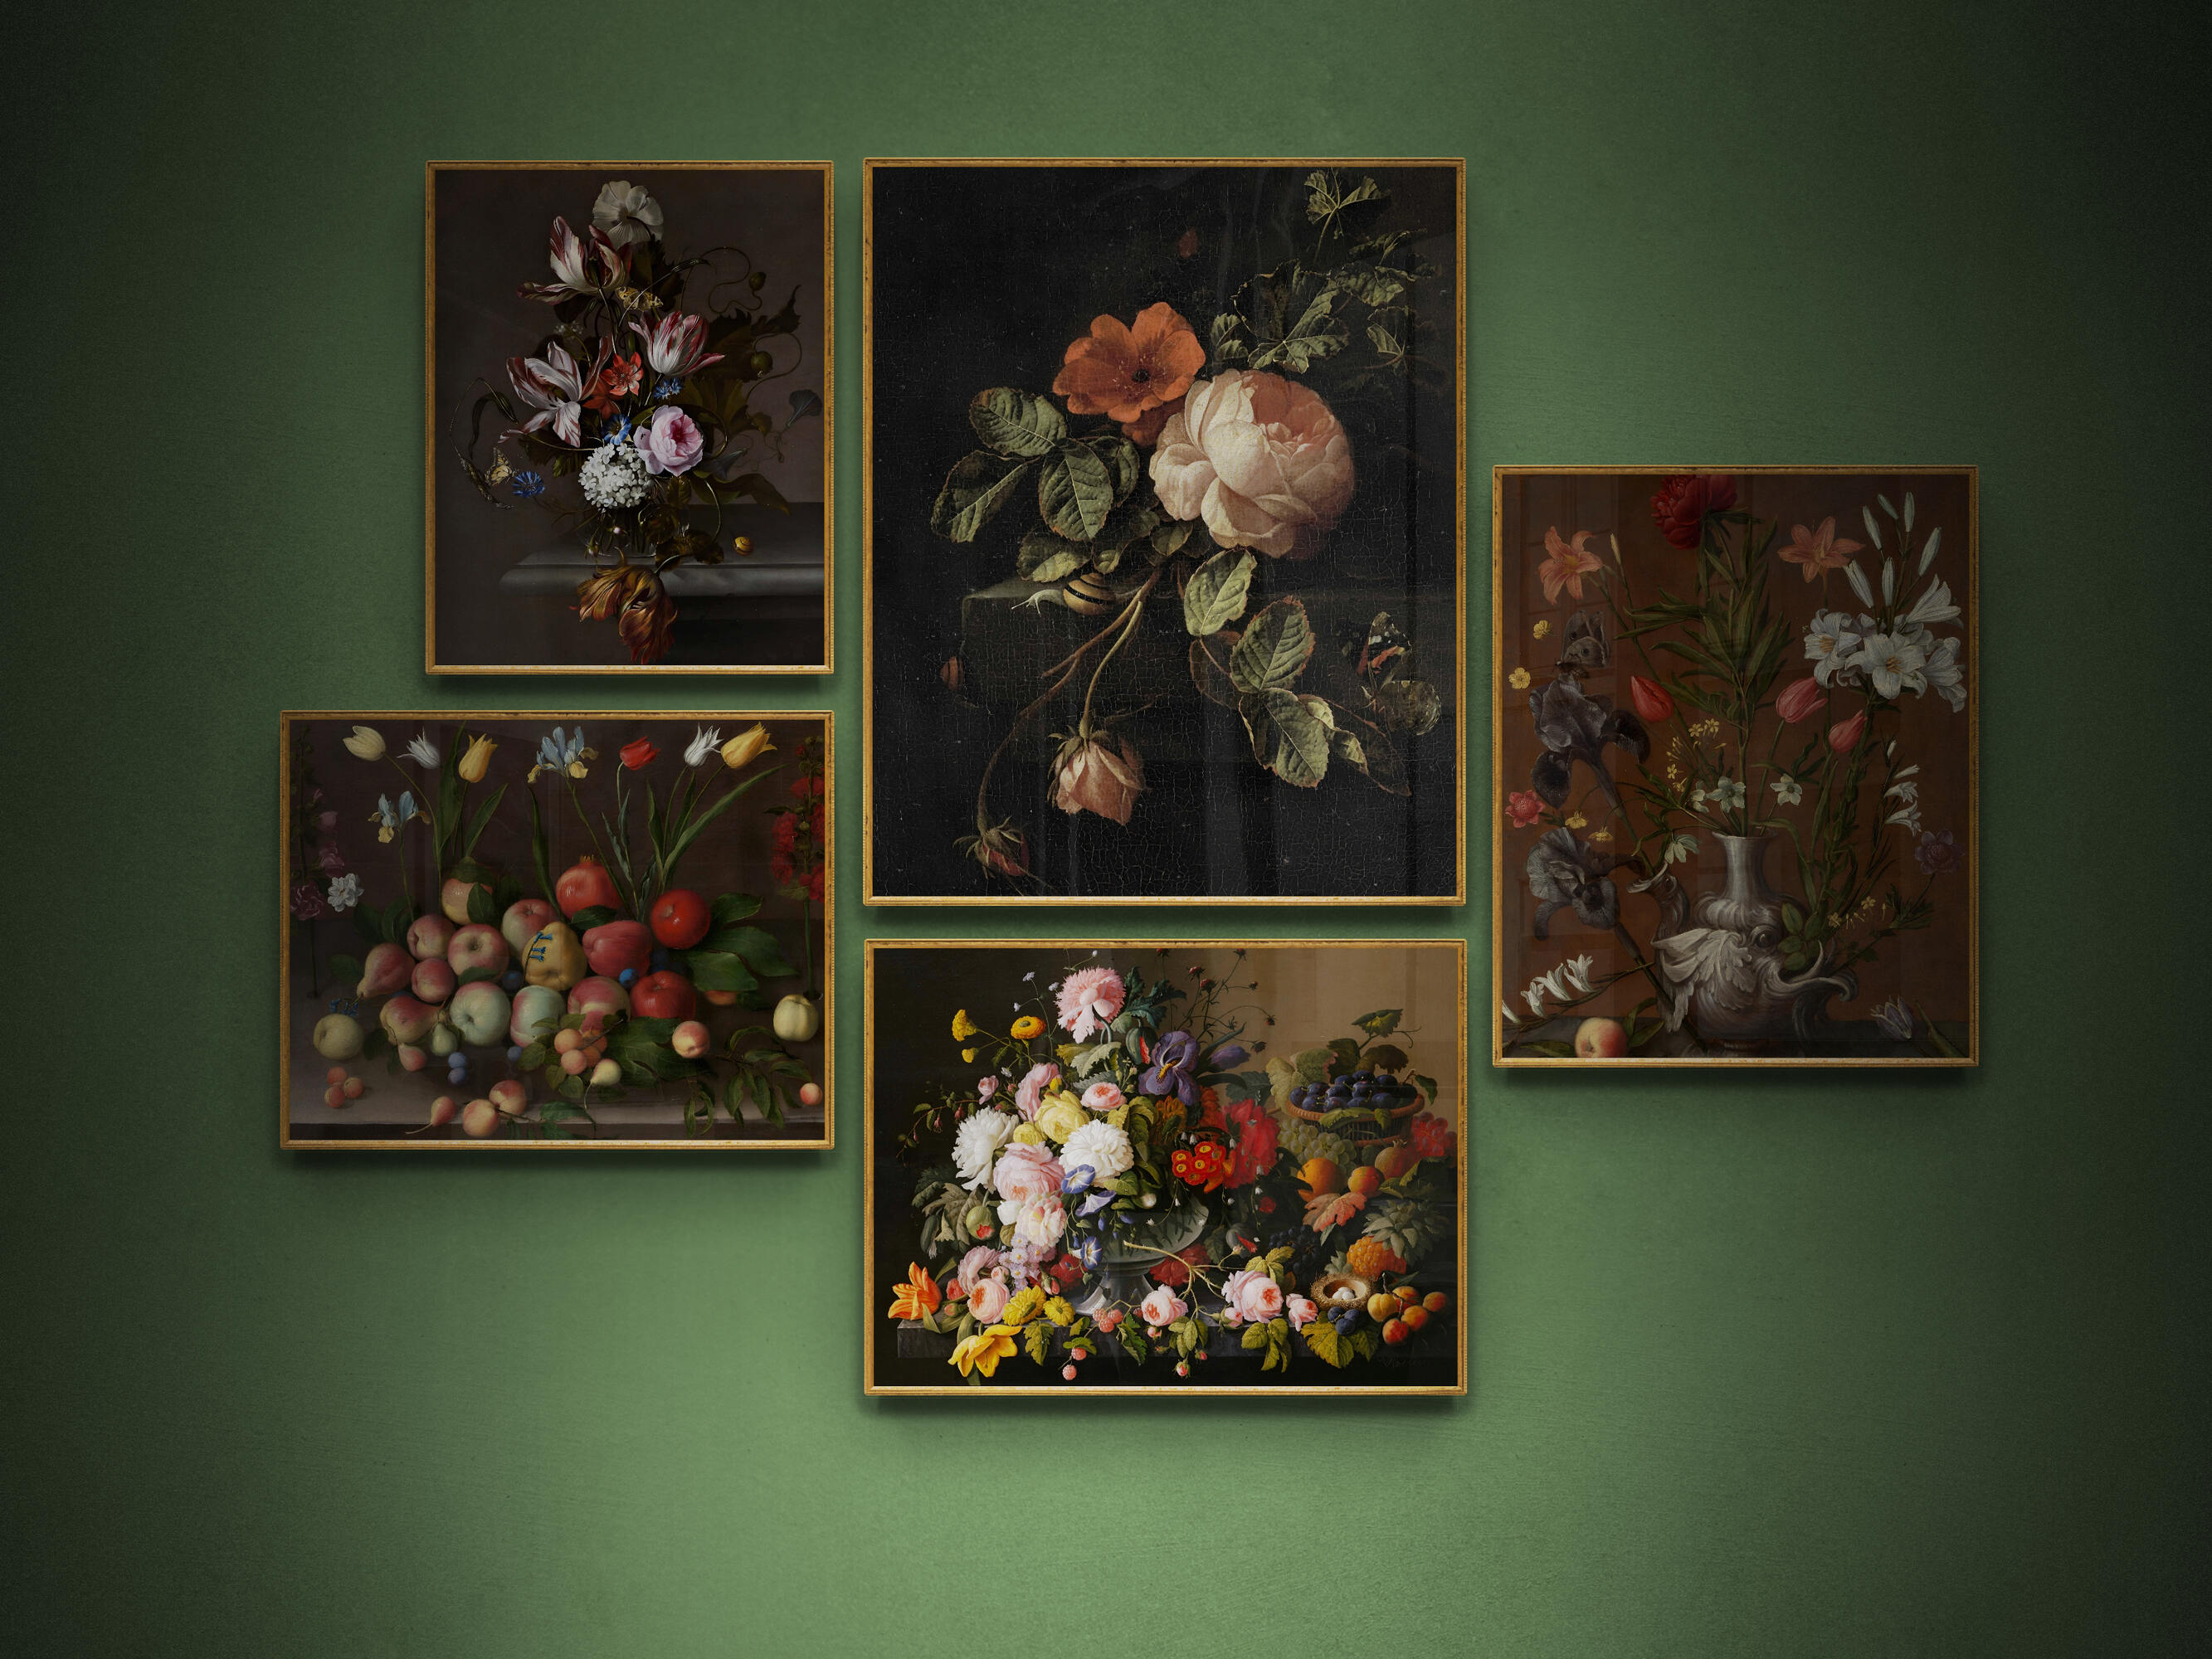 Moody Florals, Gallery Wall Art Set, Dark Academia Room Decor, Printable Art, DIGITAL DOWNLOAD, 13 High-Resolution Images + How to Guide